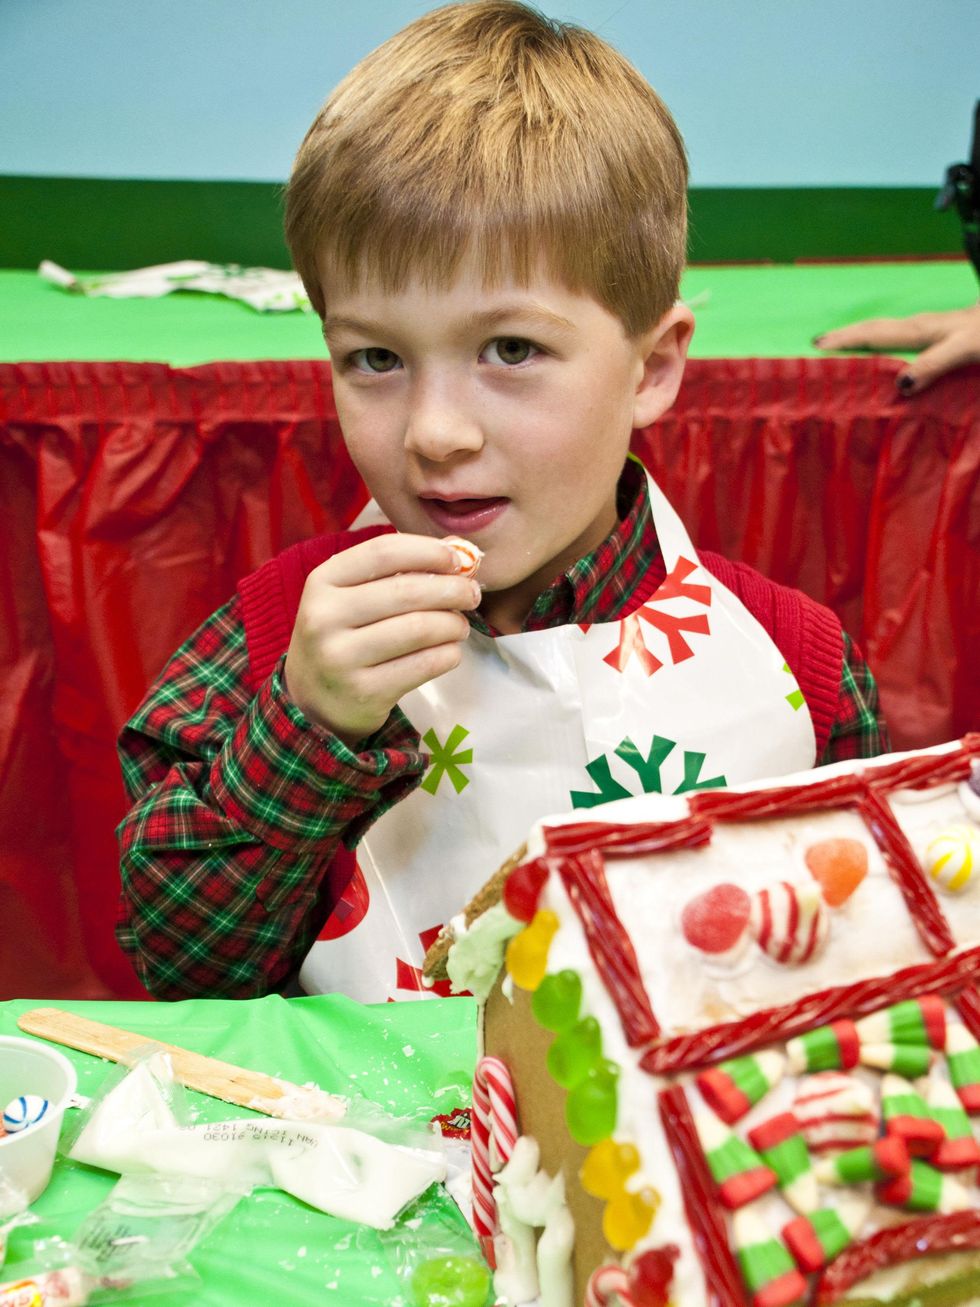 News_Gingerbread House Party_December 2011_Grant Petersen